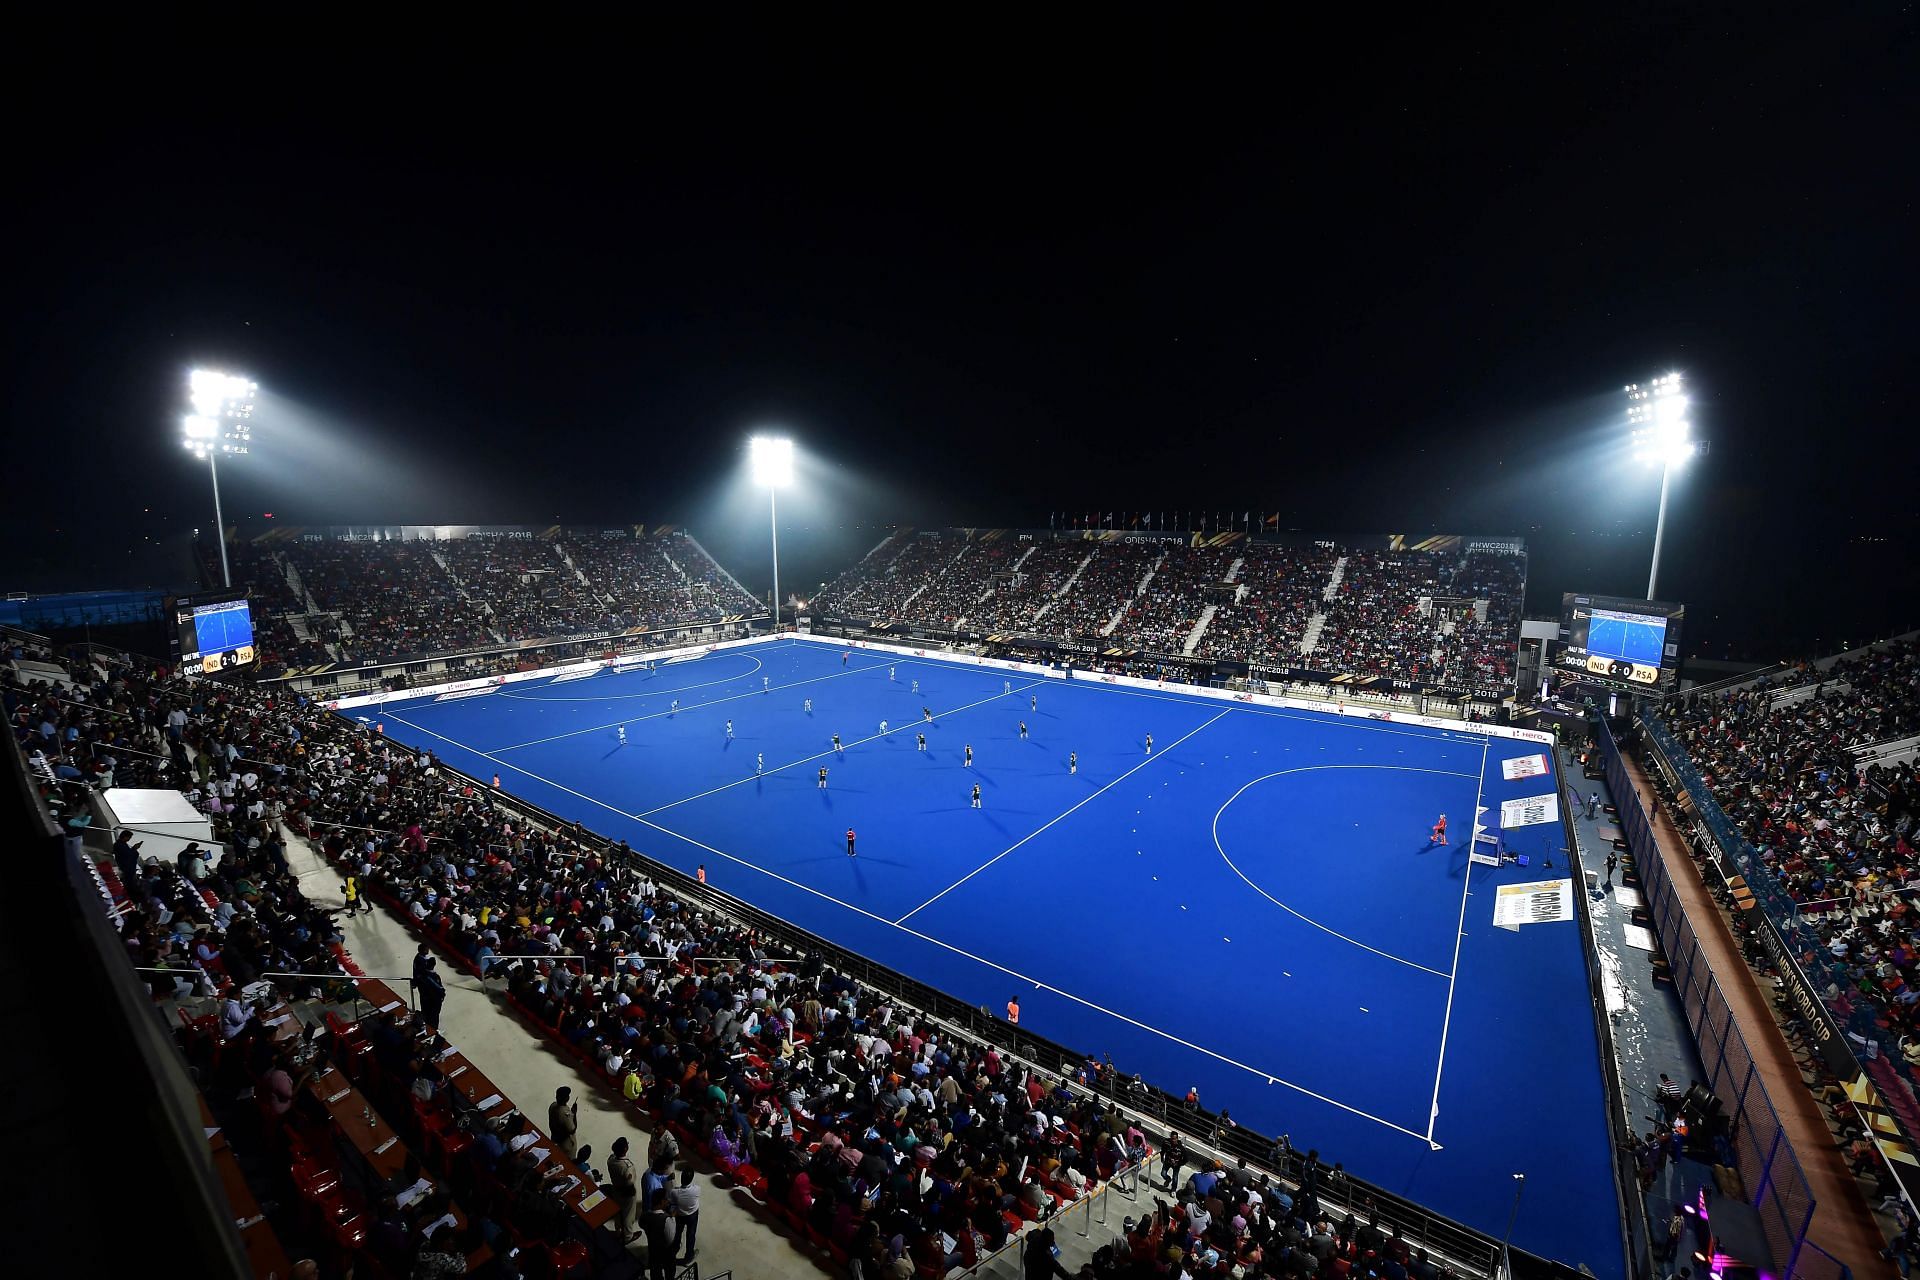 The Kalinga Stadium in Bhubaneshwar is one of the host stadiums for the 2023 World Cup.